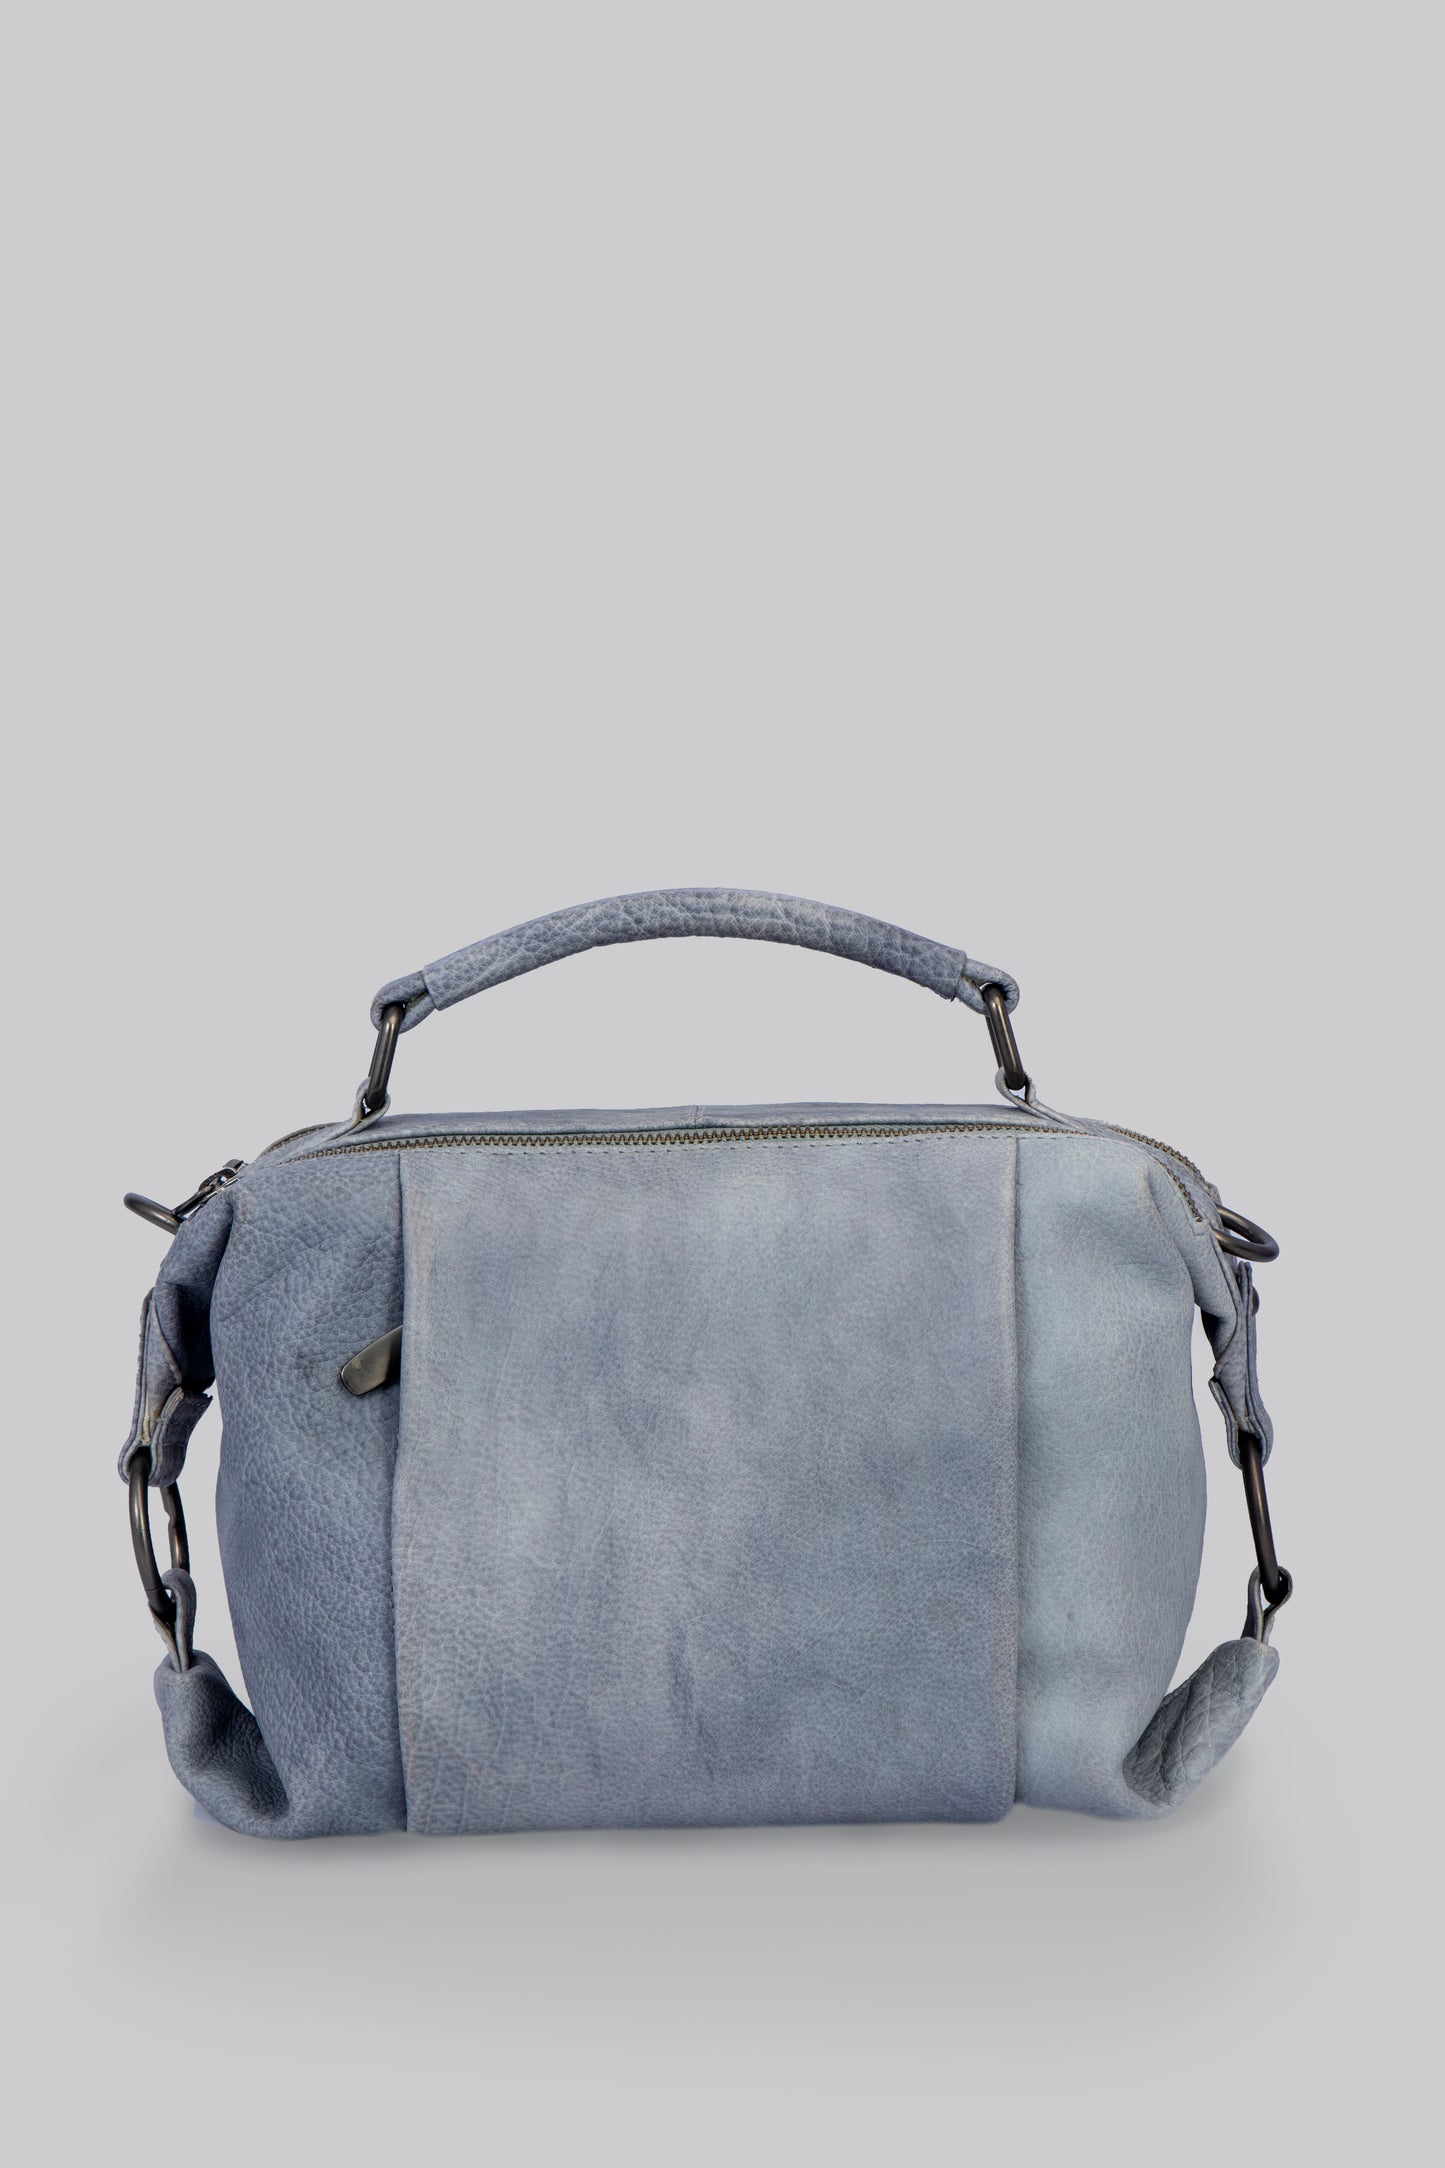 Paula- Hand Bag with Grip Handle in Stone Washed Leather